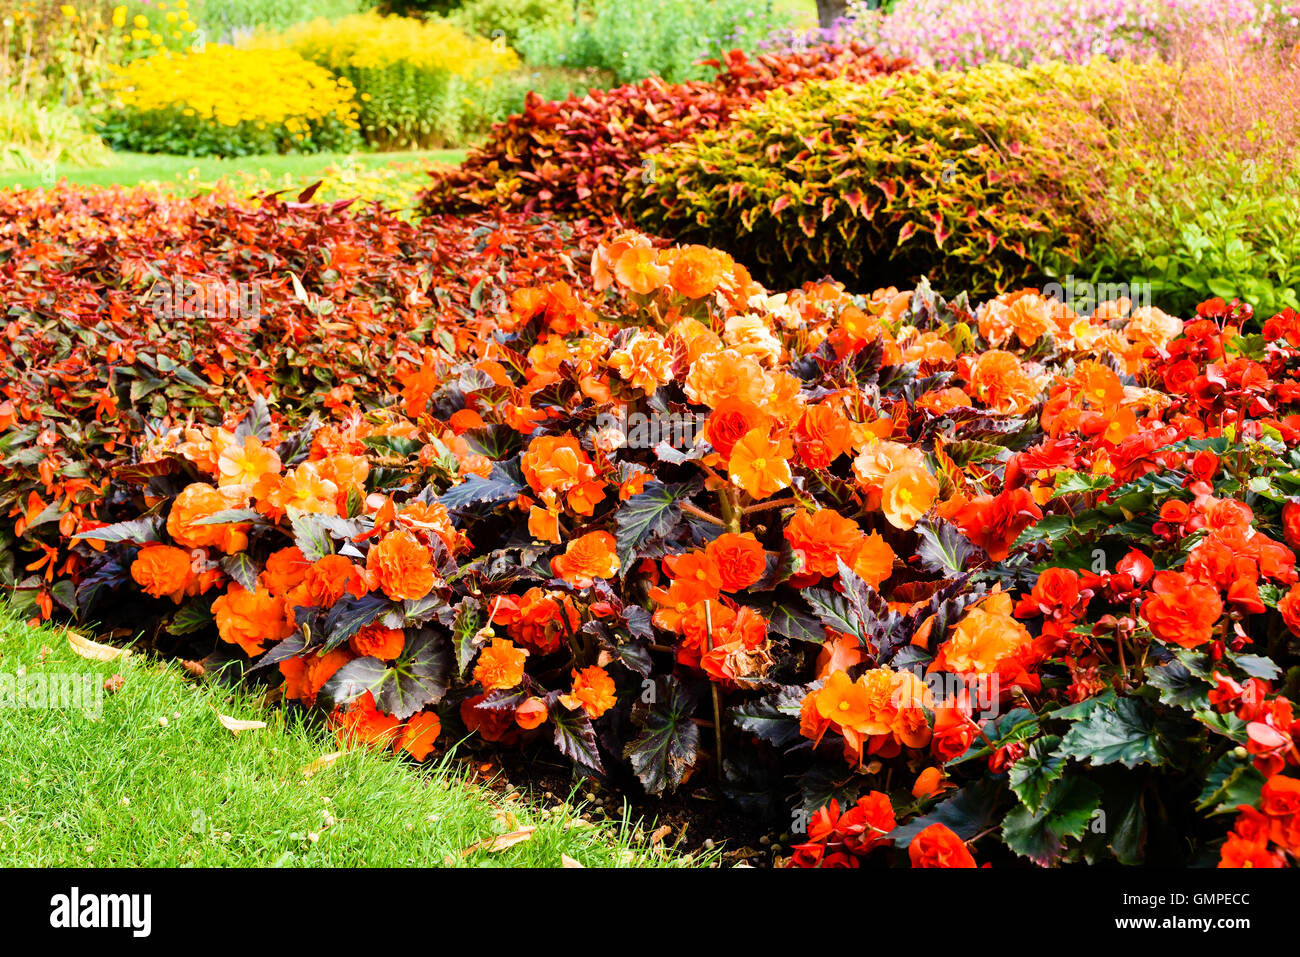 Orange red Begonia cultivar in ornamental flowerbed. Other flowers in the background. Stock Photo